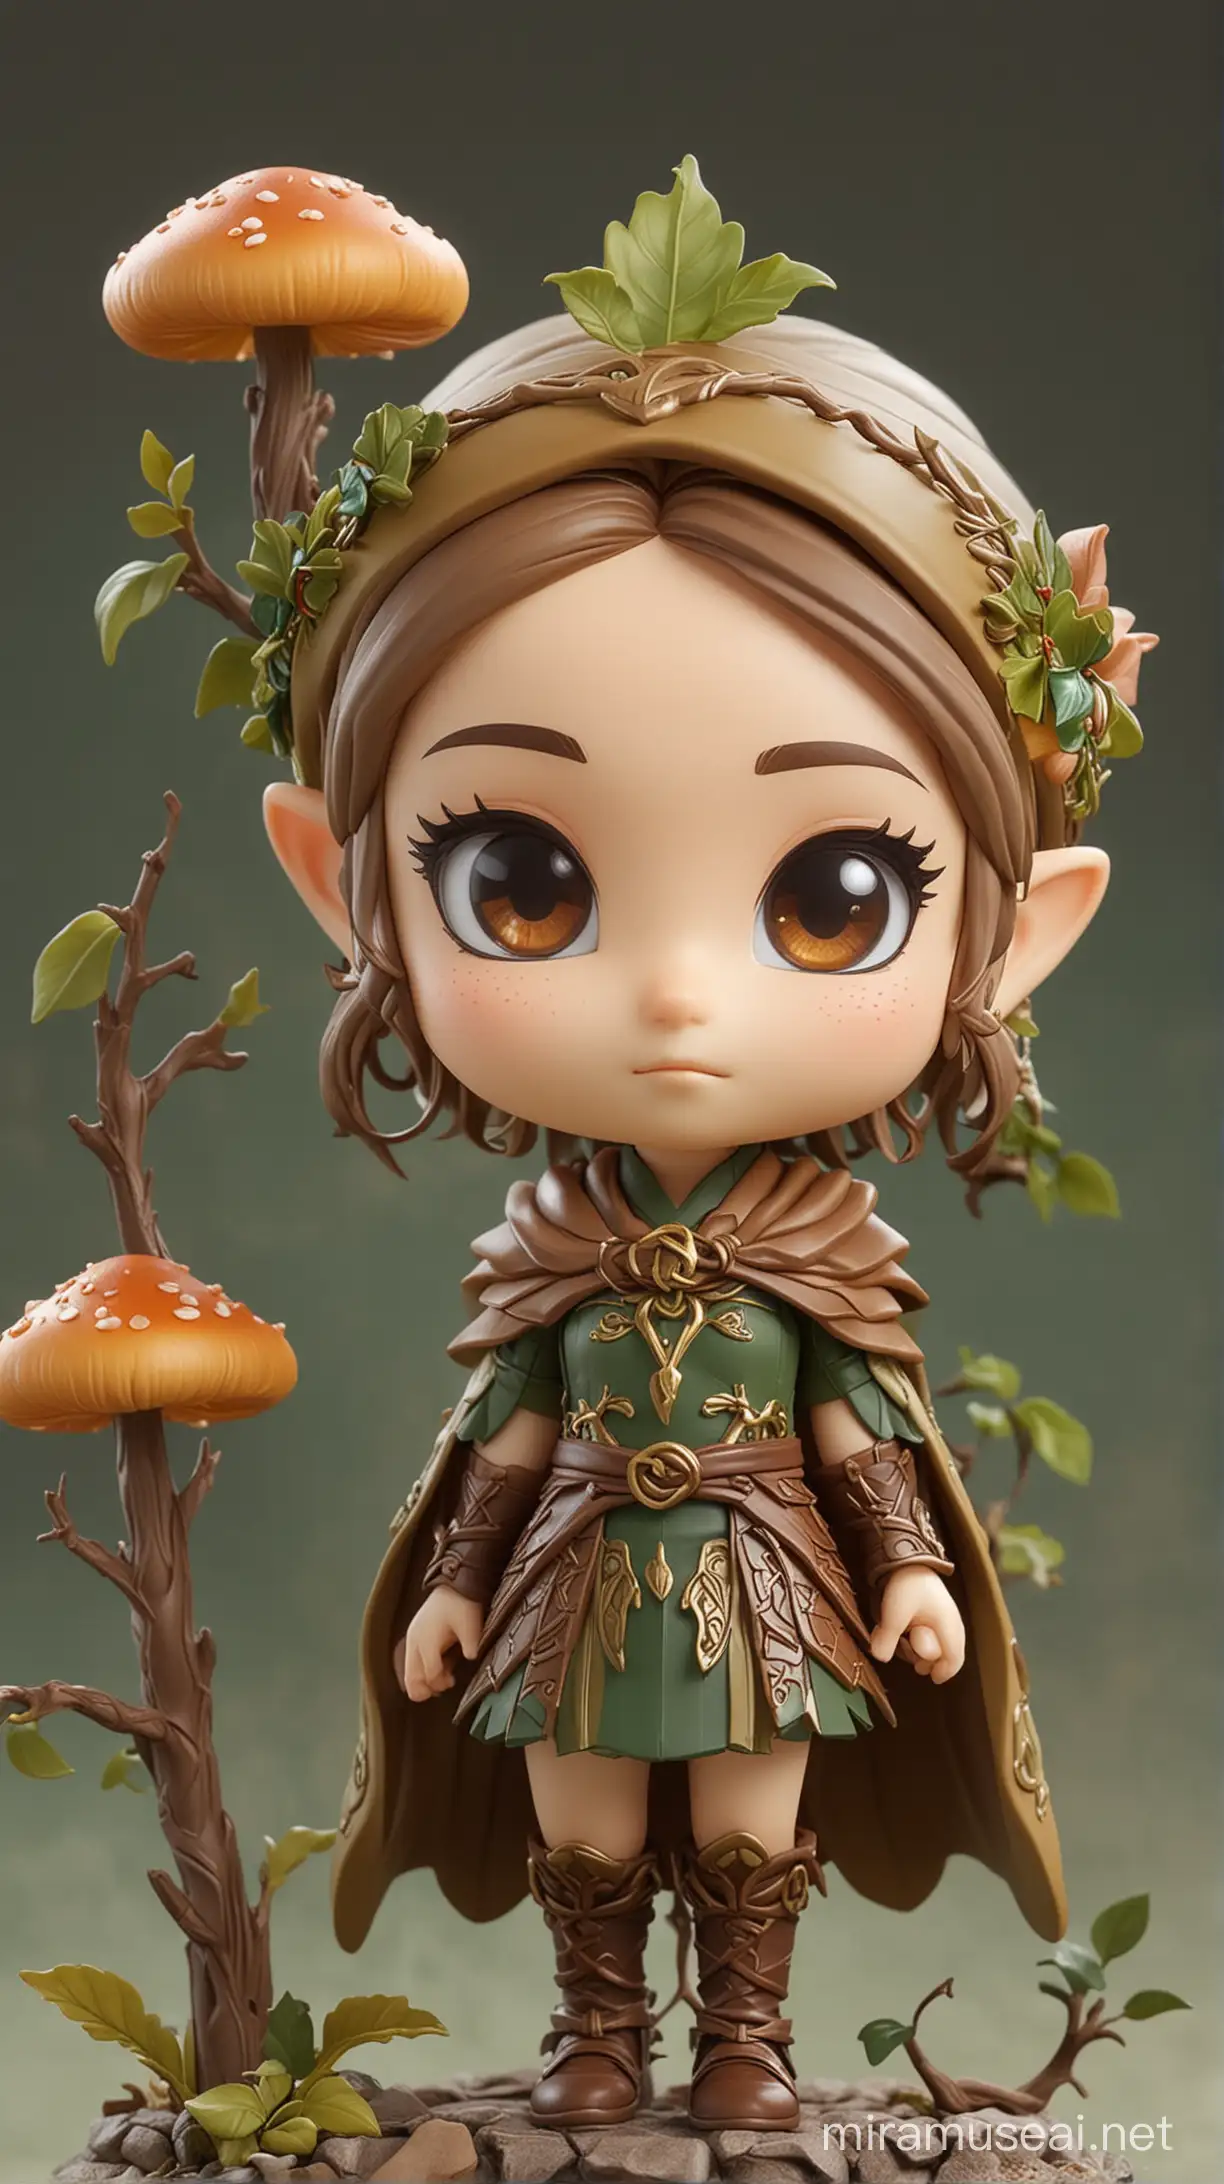 Create a chibi Nendoroid version of an elven being inspired by nature forms; in their conceptual design, elements like mushrooms, tree branches, and leaves are utilized to adorn their attire.